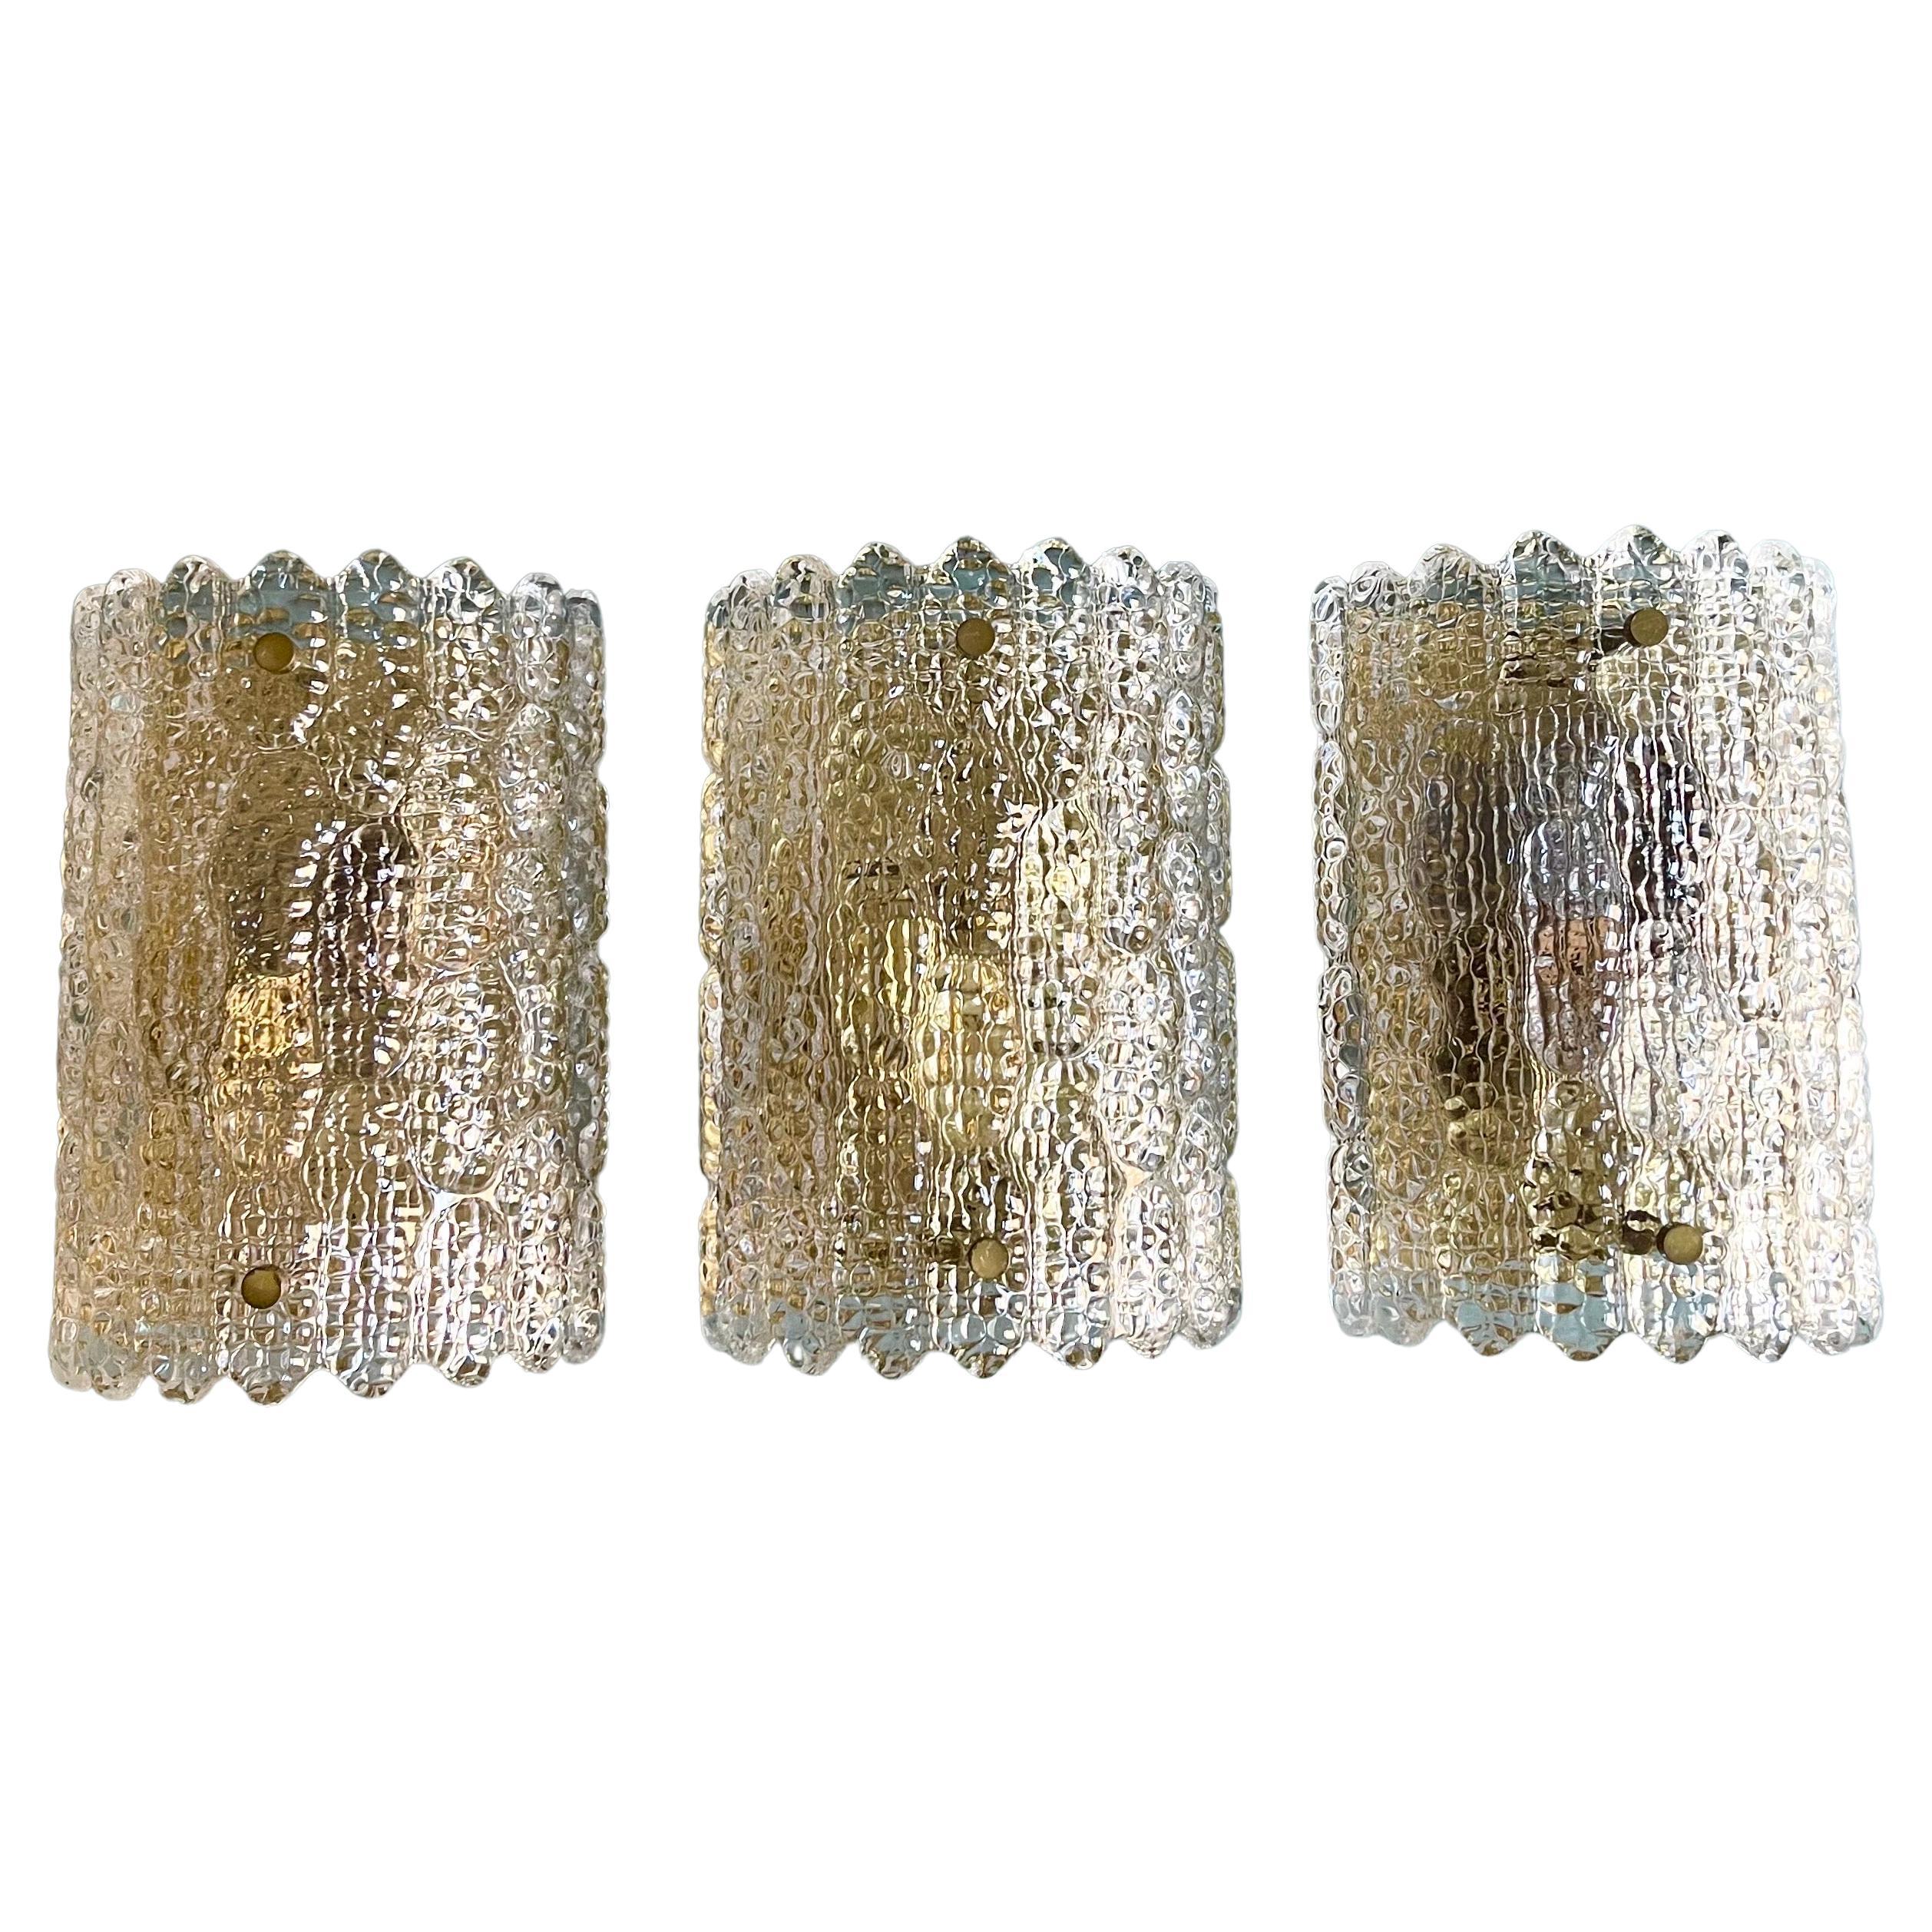 Set of three Mid-Century Modern wall sconces by swedish designer Carl Fagerlund for Orrefors.
It is composed of textured thick glass elements and polished brass hardware.
Socket: each 2 x E 14 for standard screw bulbs.